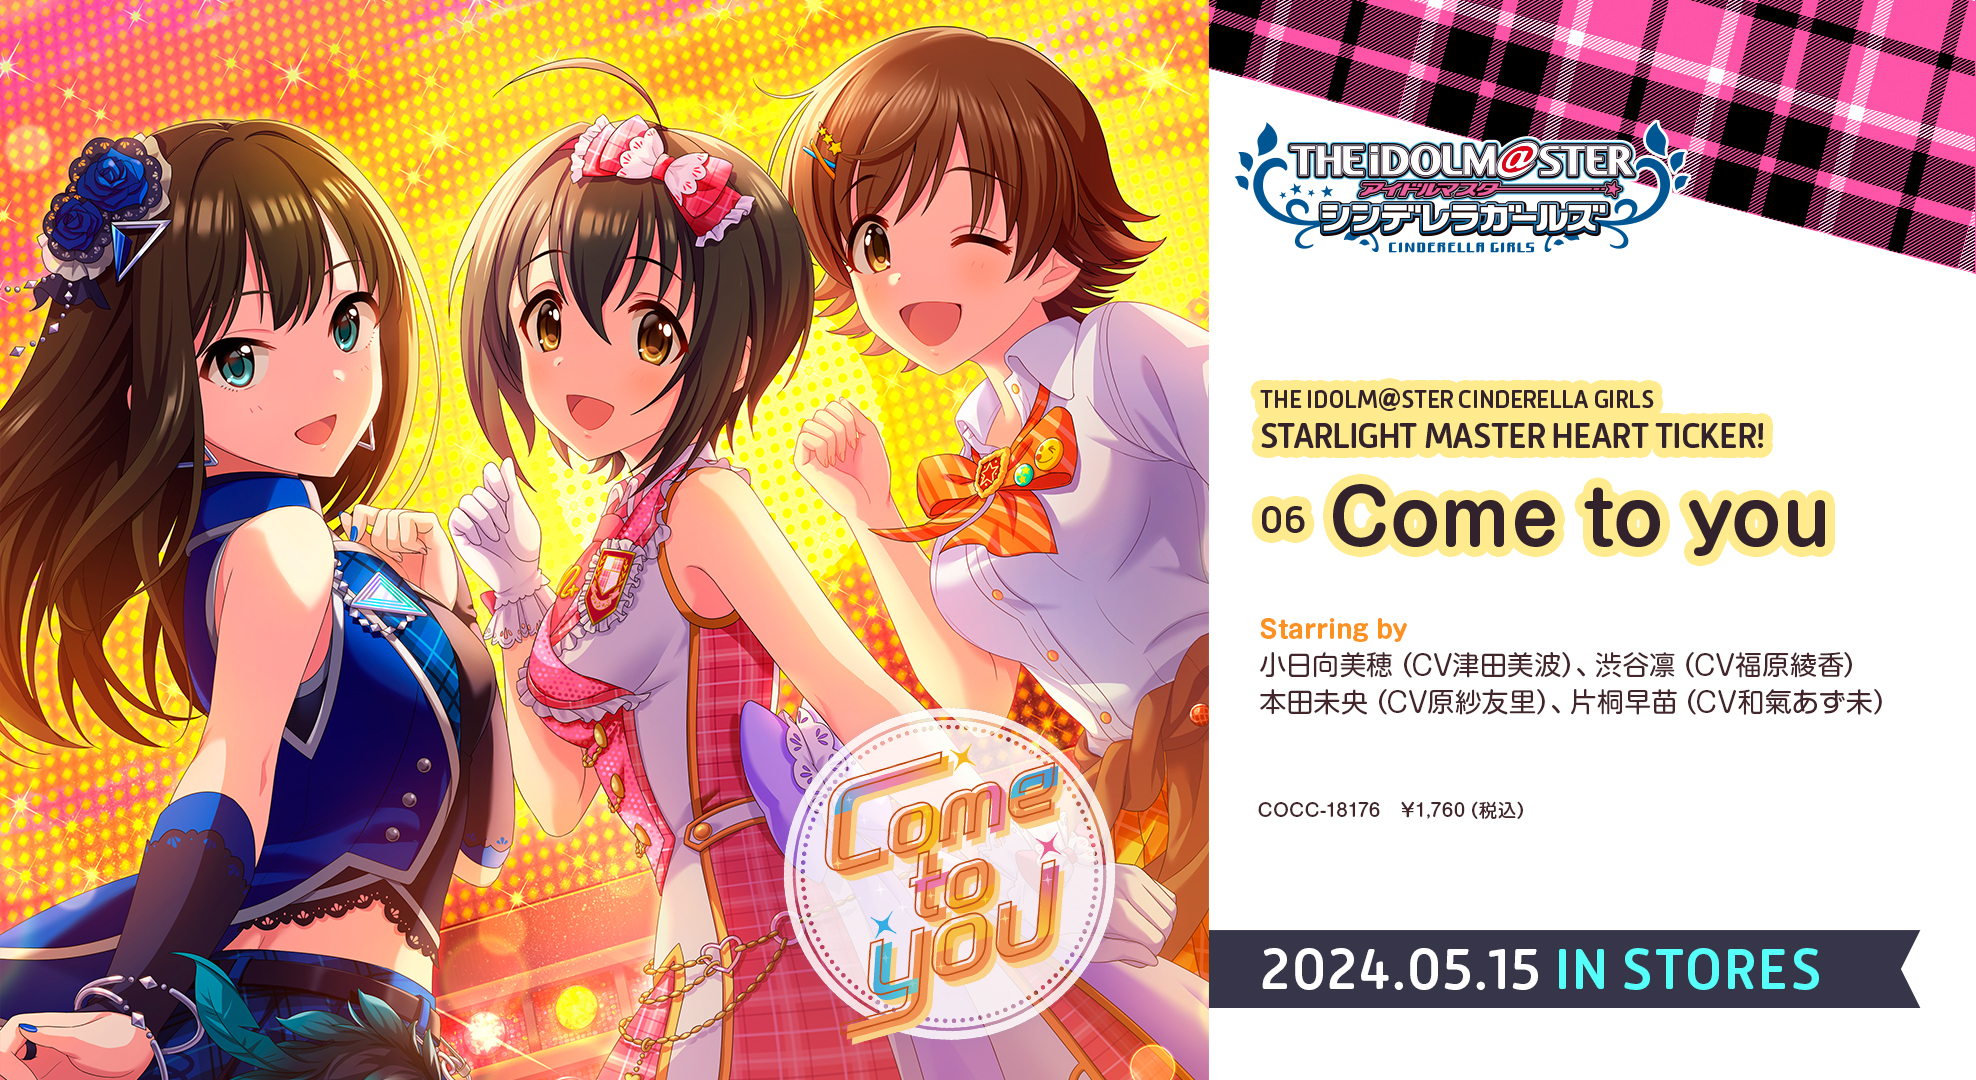 THE IDOLM@STER CINDERELLA GIRLS STARLIGHT MASTER HEART TICKER! 06 Come to you'